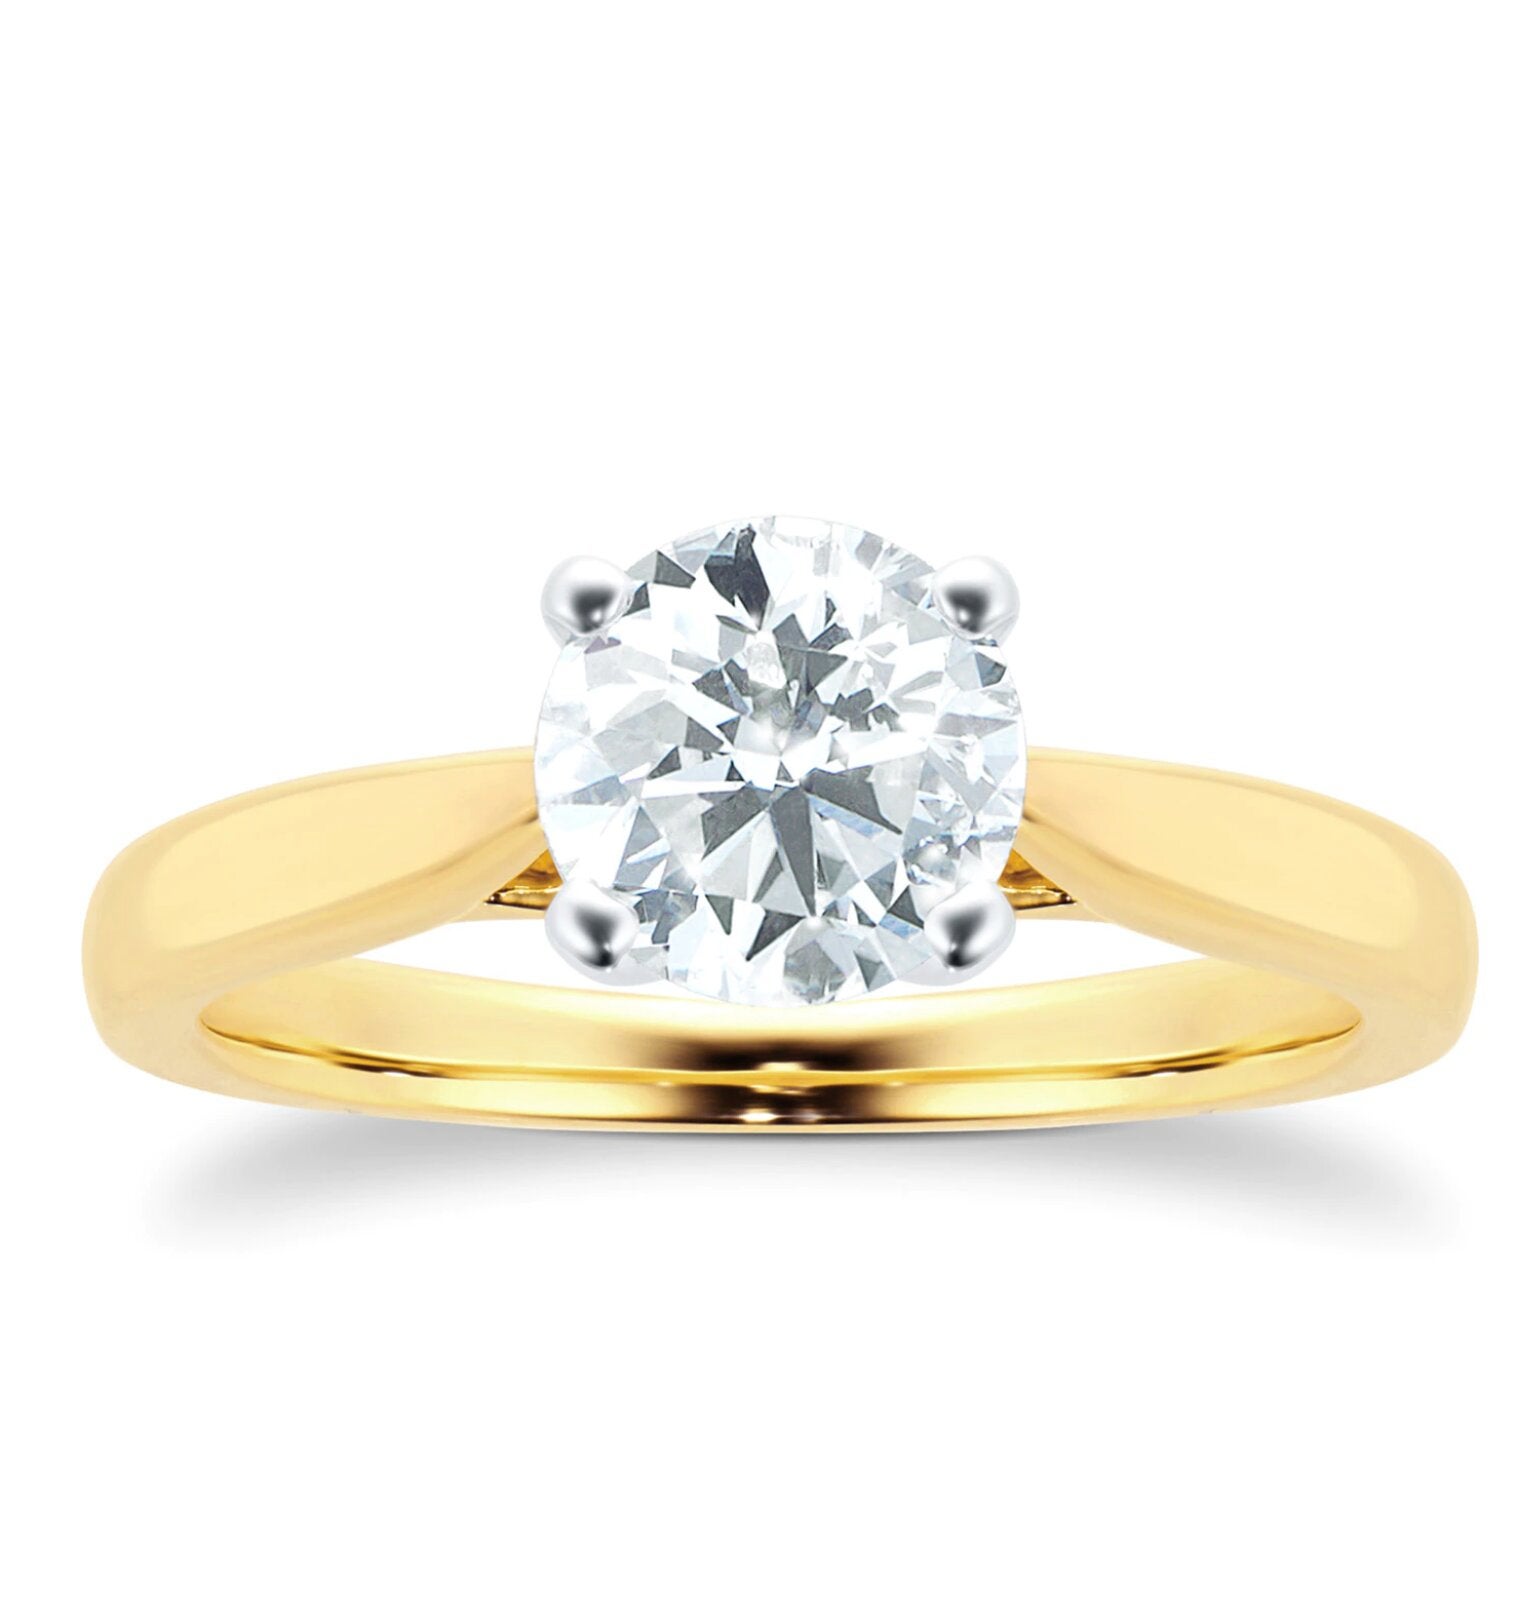 7 Engagement Ring Trends That Will Be Big In 2023